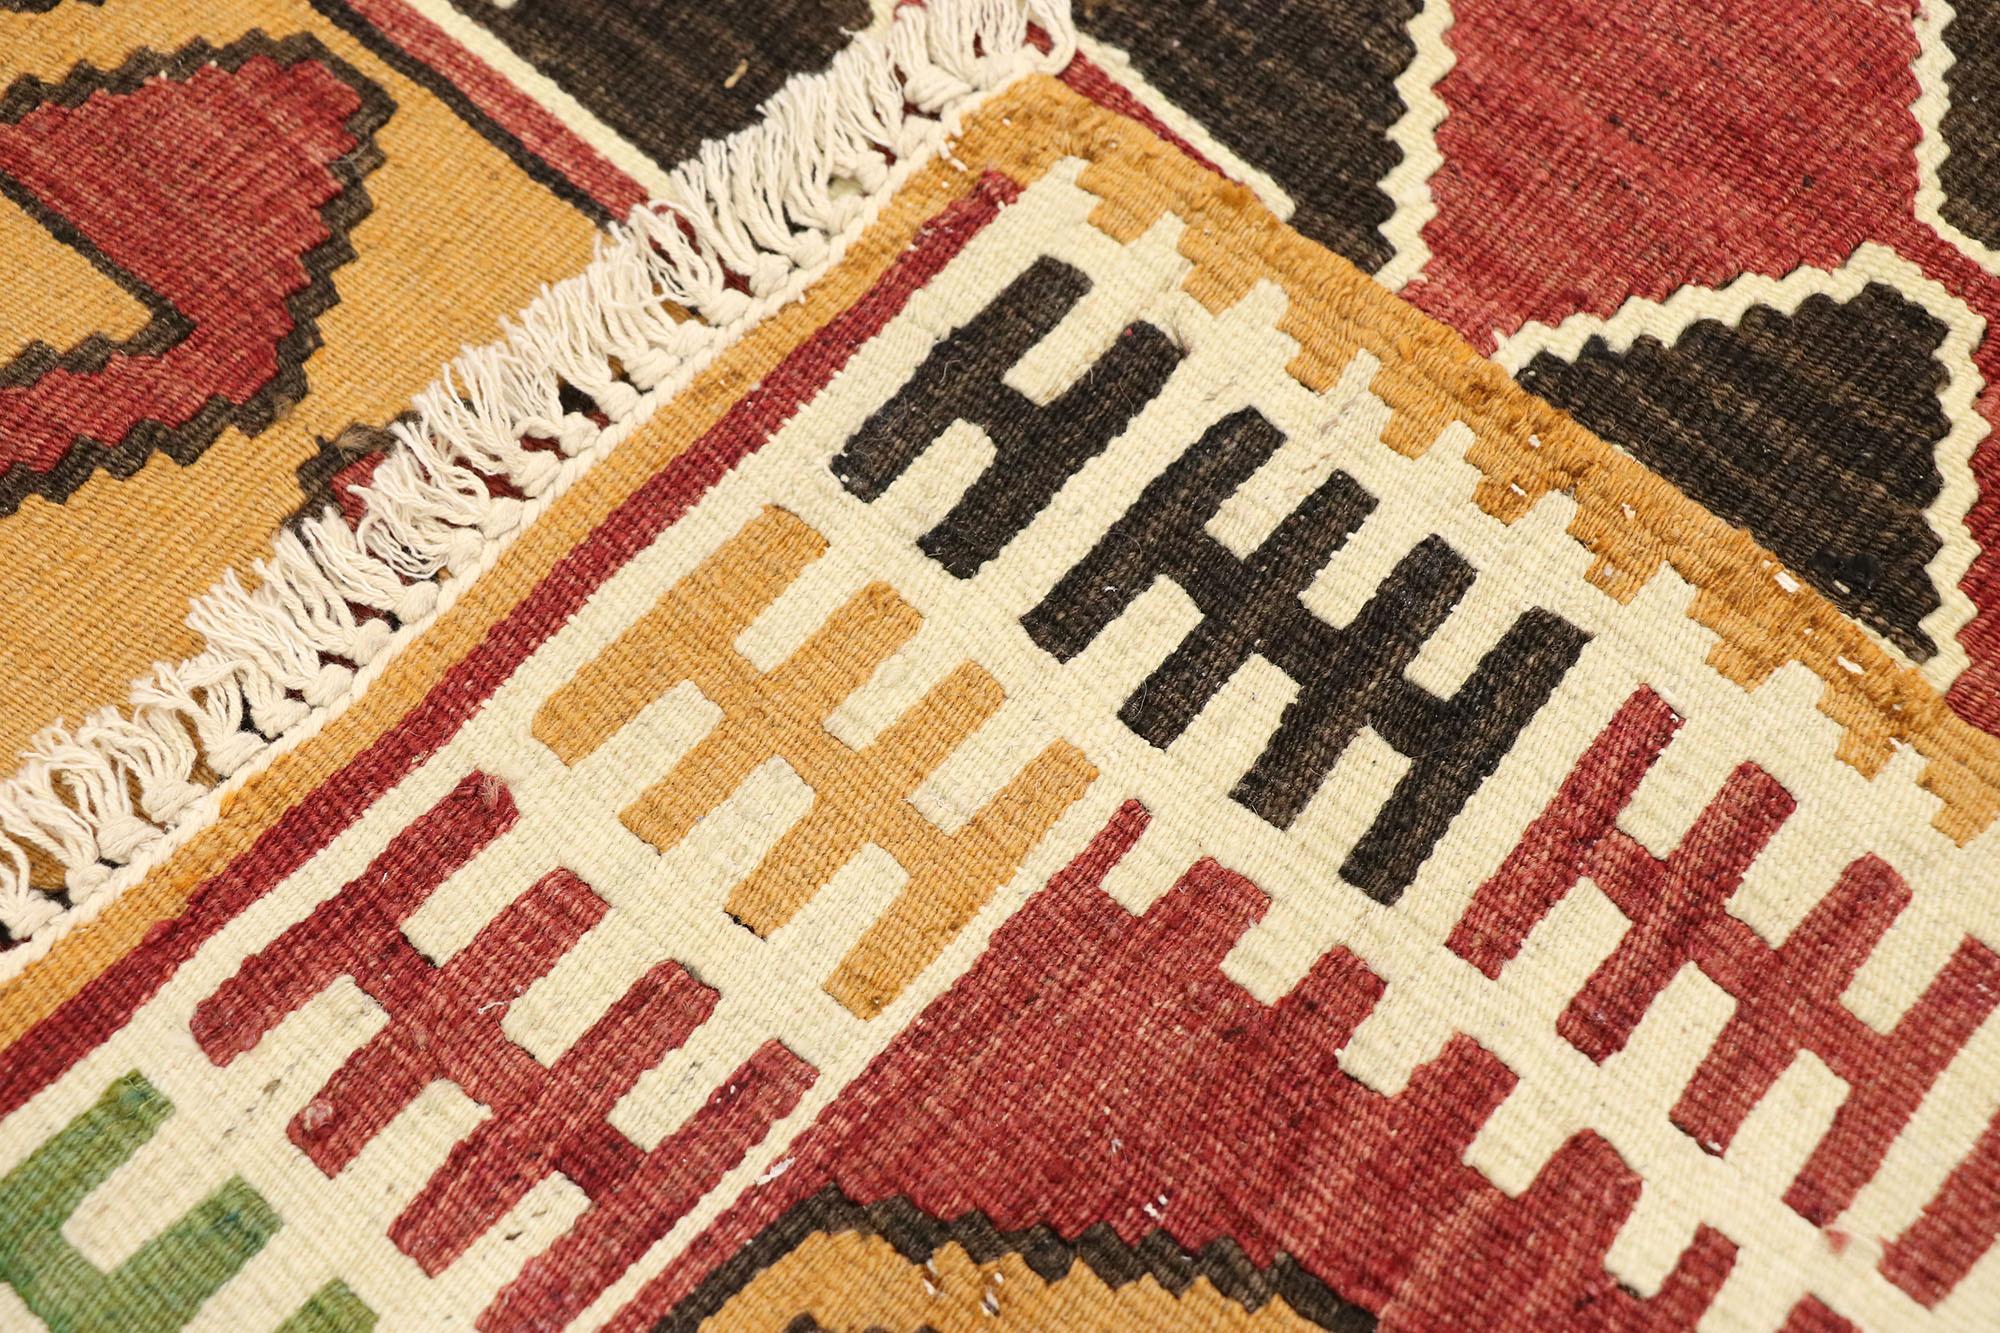 Vintage Persian Shiraz Kilim Rug, Modern Desert Meets Luxury Lodge In Good Condition For Sale In Dallas, TX